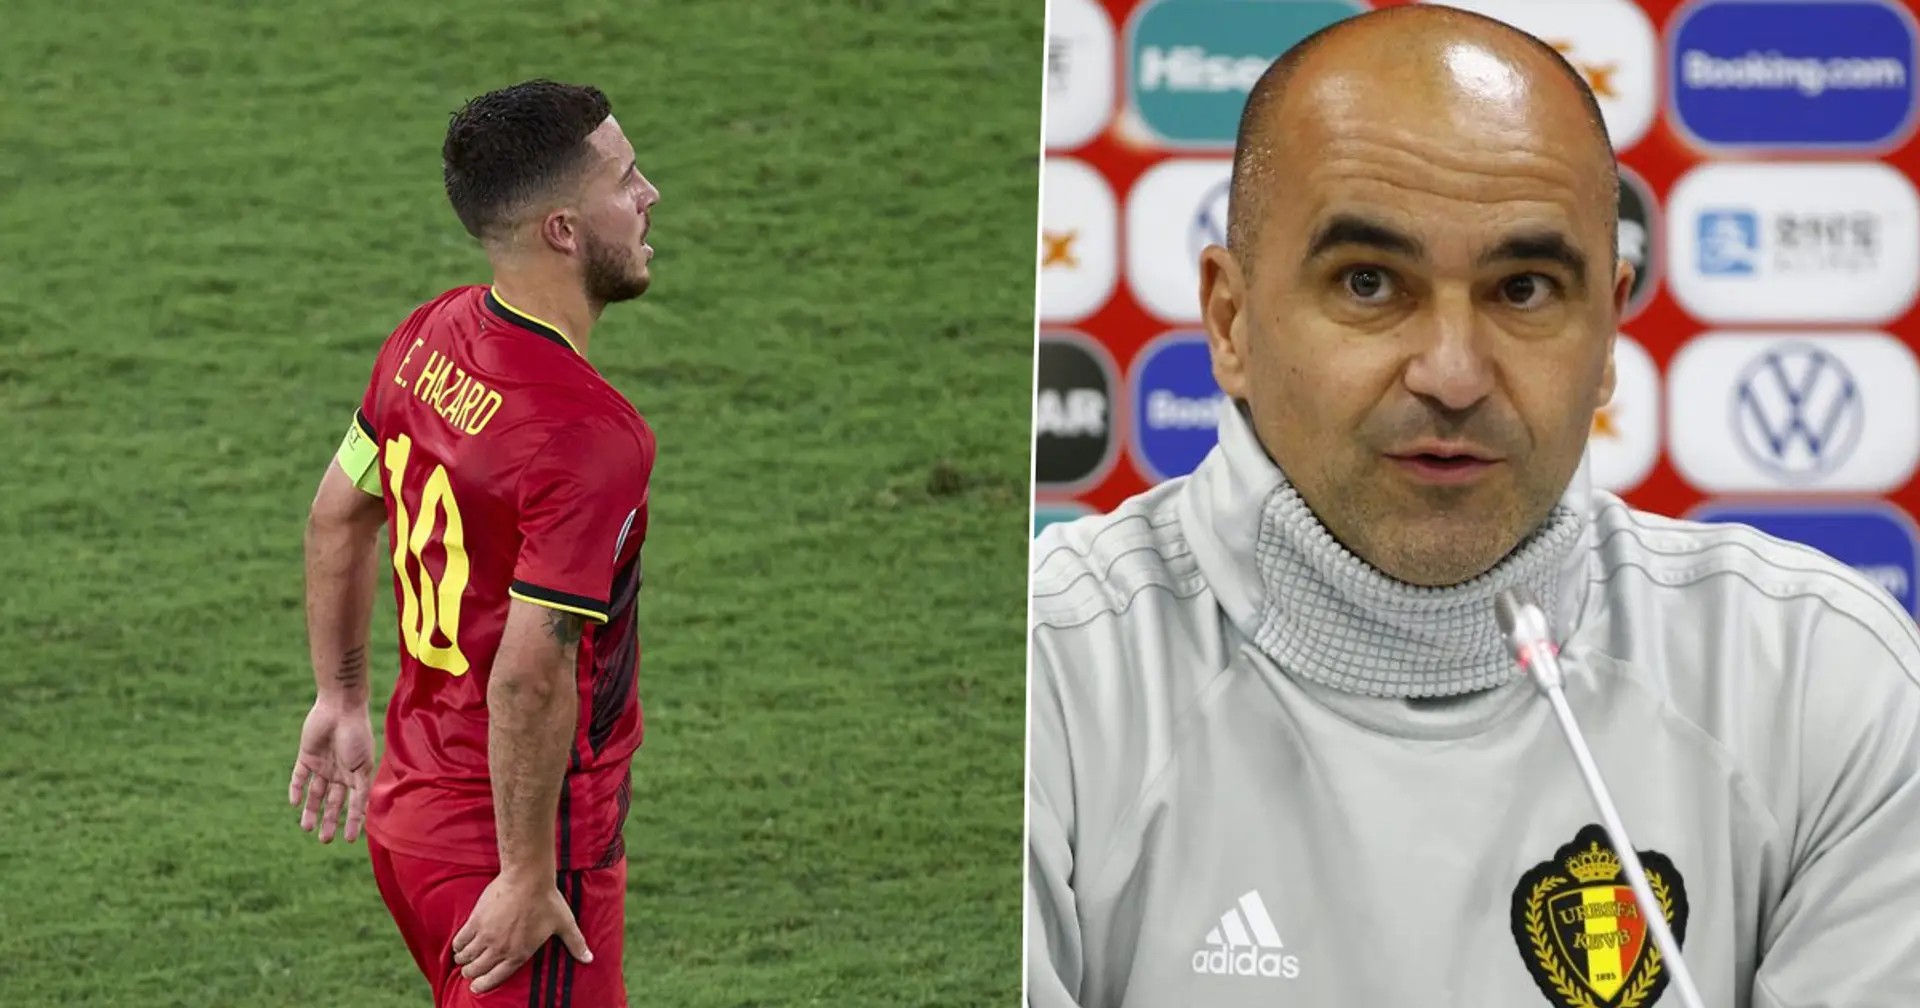 Belgium boss provides 'quite positive' update on Hazard but rules him out of Italy game